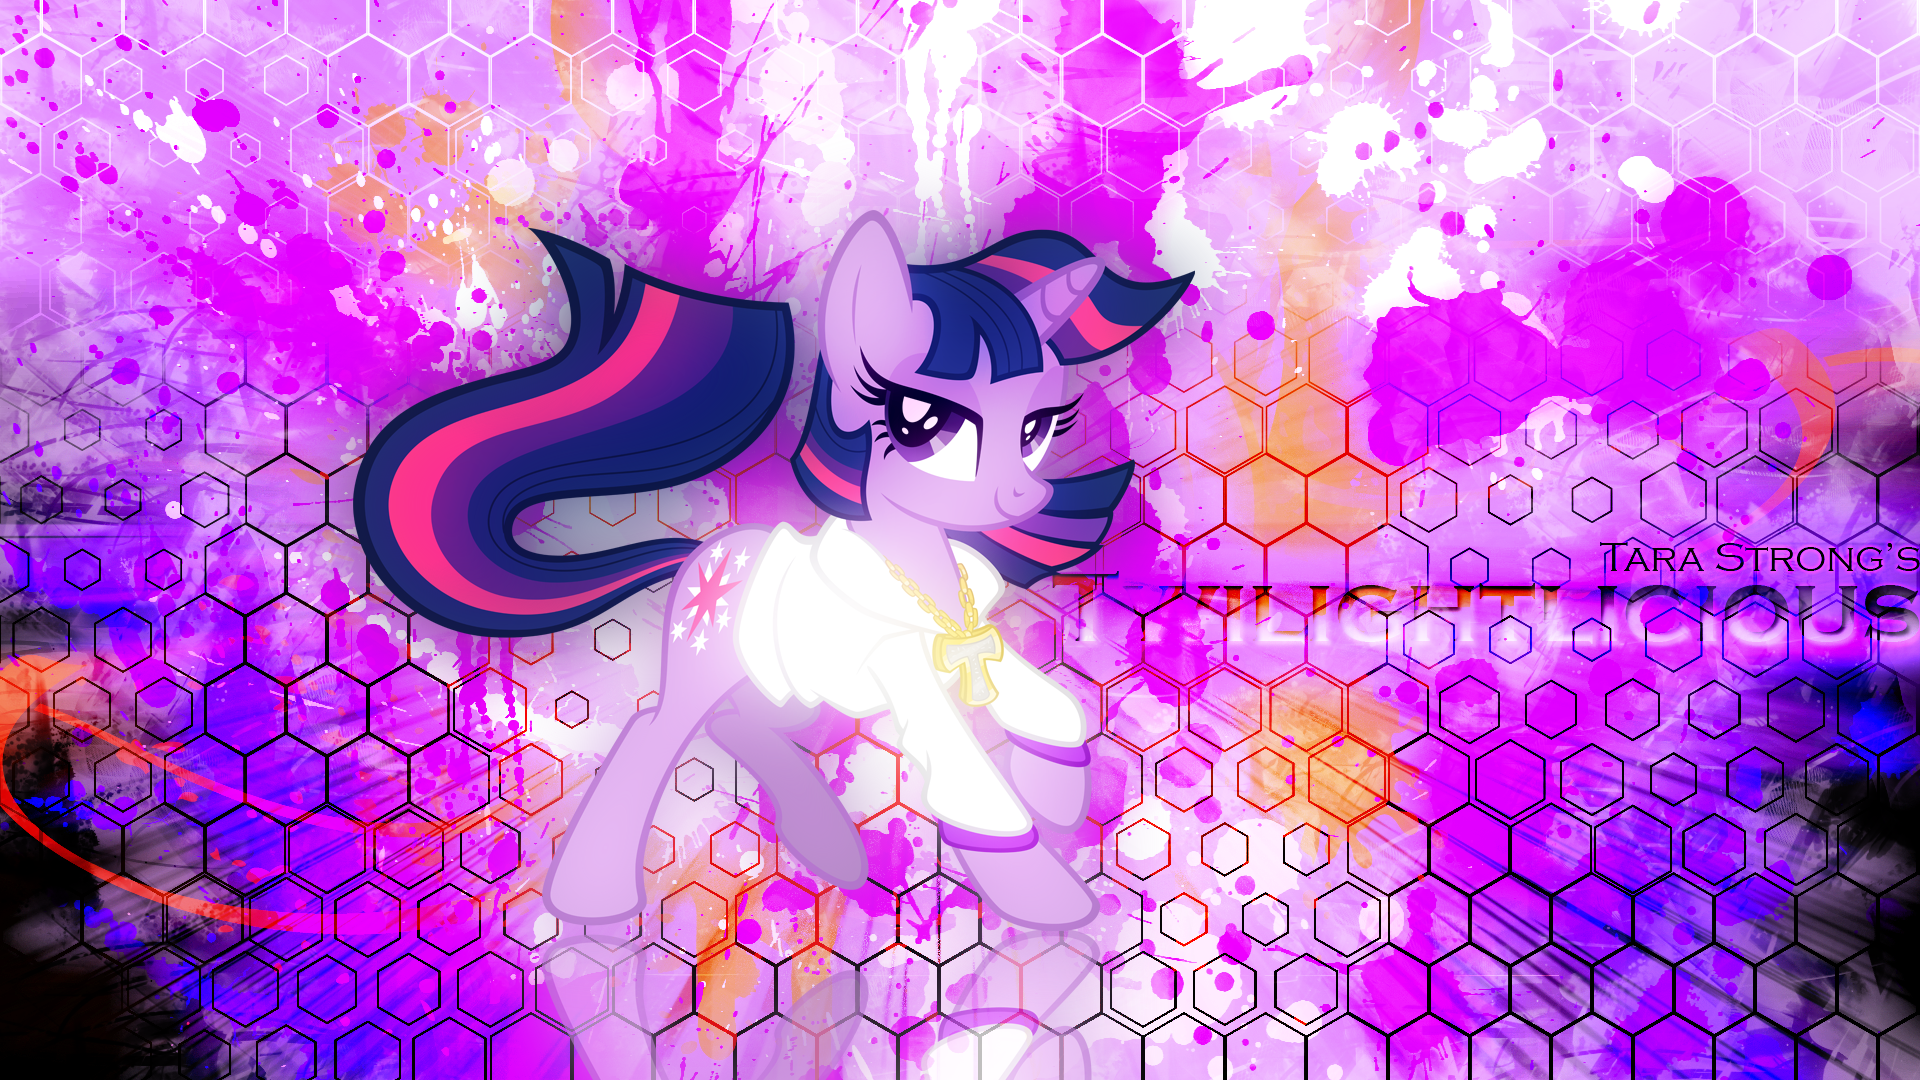 Twilightlicious is Full of Magic Wallpaper by EnemyD, johnjoseco and tygerbug